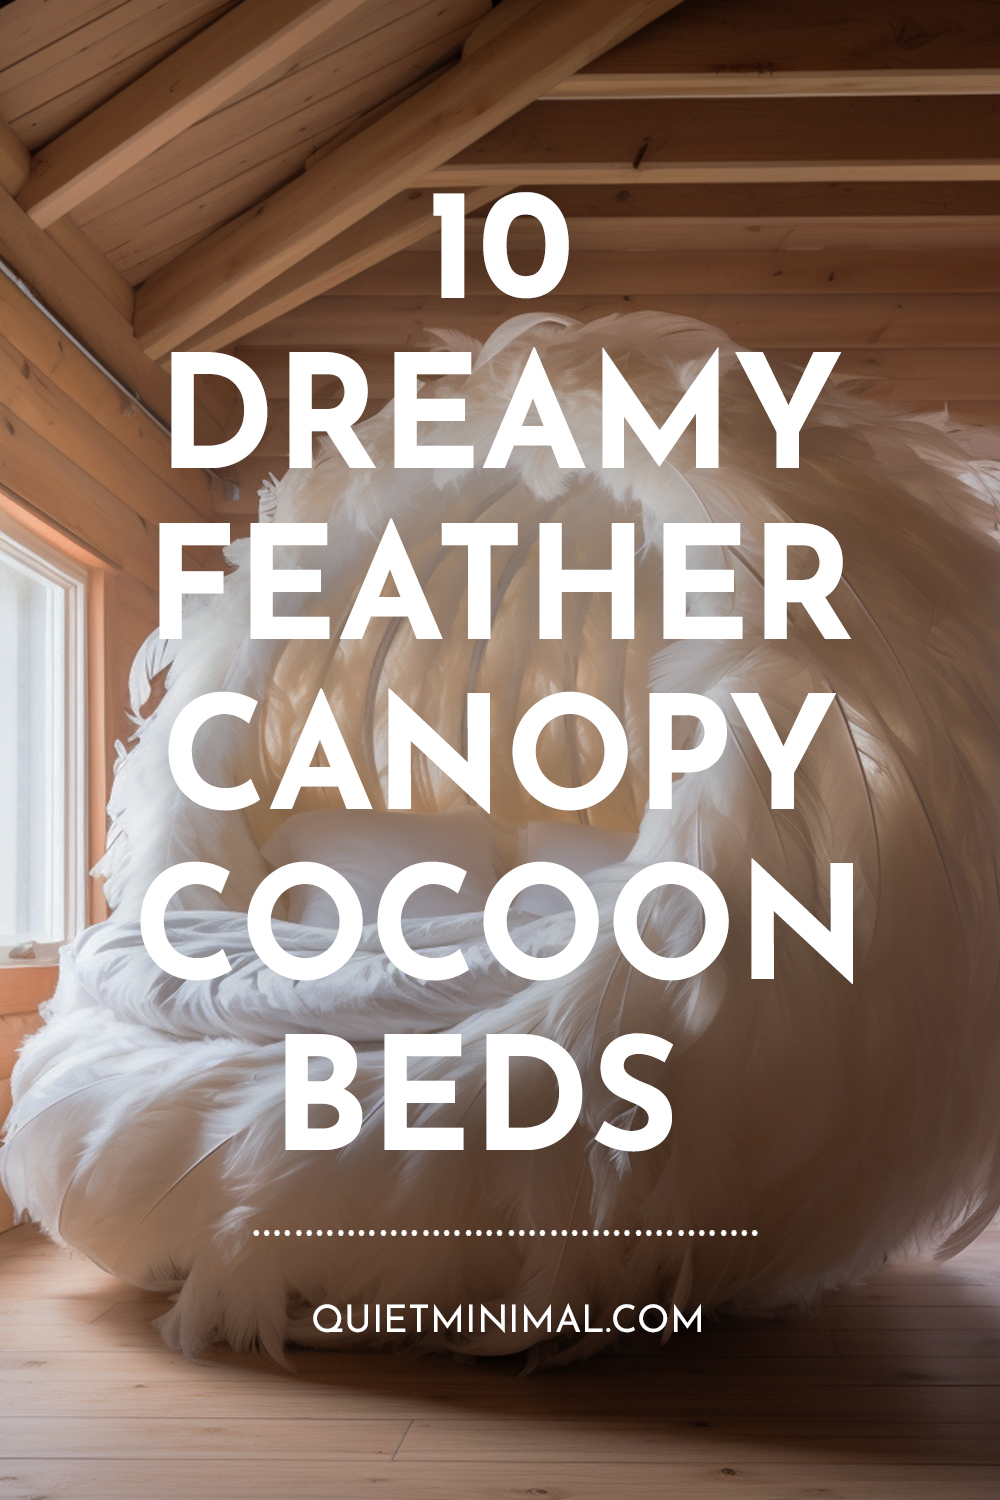 10 Whimsical Feather Canopy Cocoon Beds.